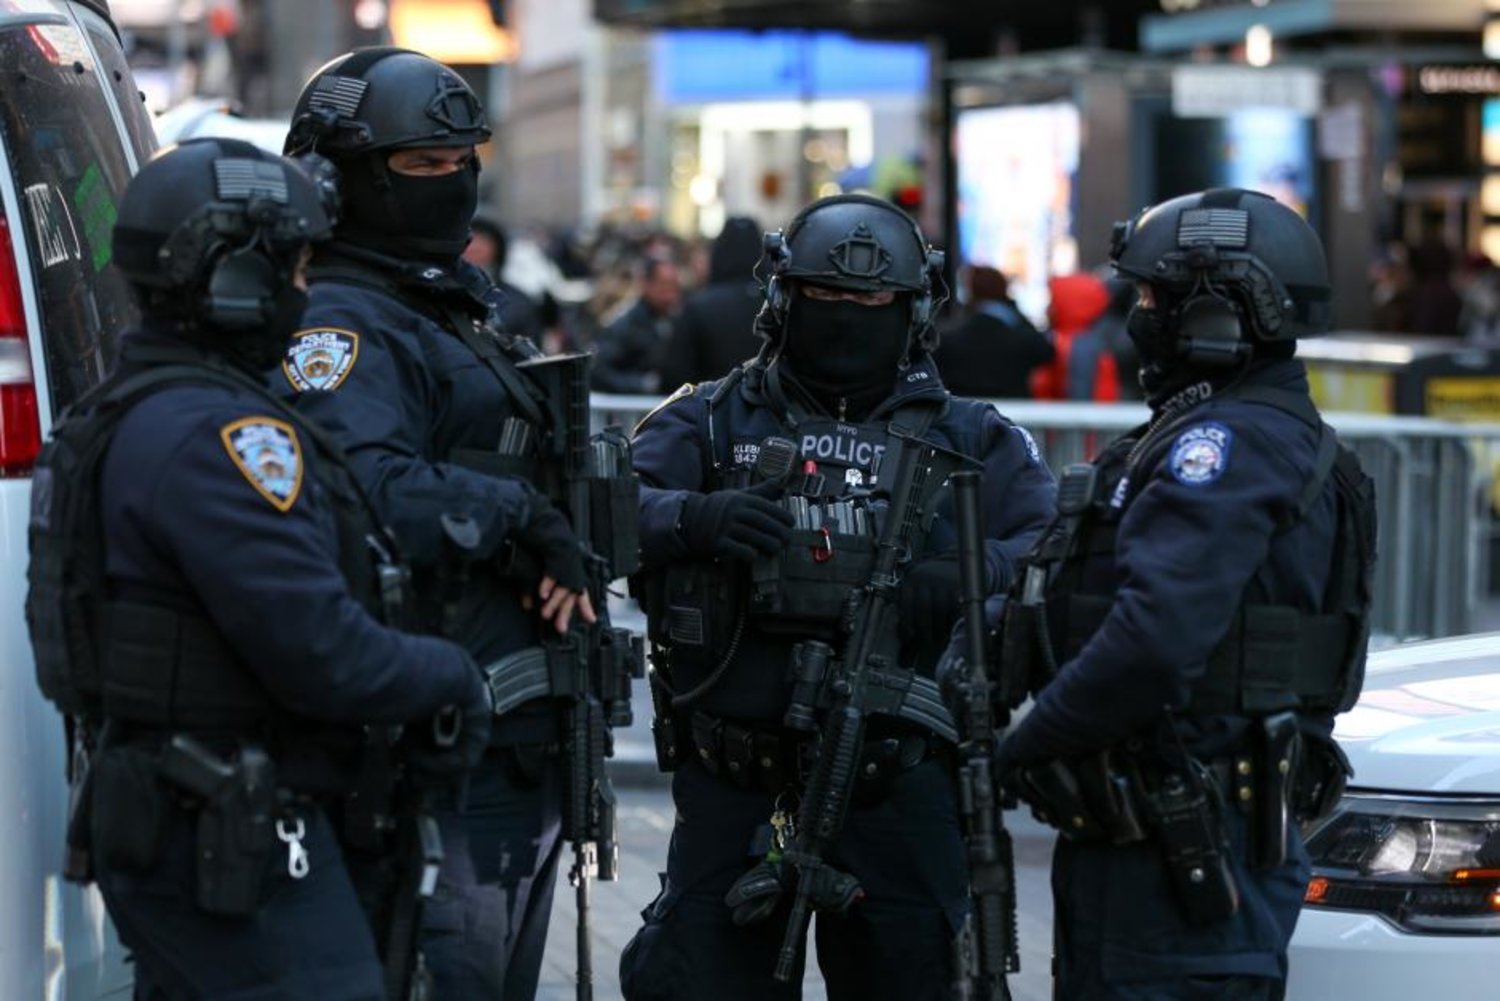 New York Police Department Counterterrorism Bureau members stand in Times Square to provide security ahead of New Year's Eve celebrations in Manhattan, New York, U.S. December 28, 2017. REUTERS/Amr Alfiky